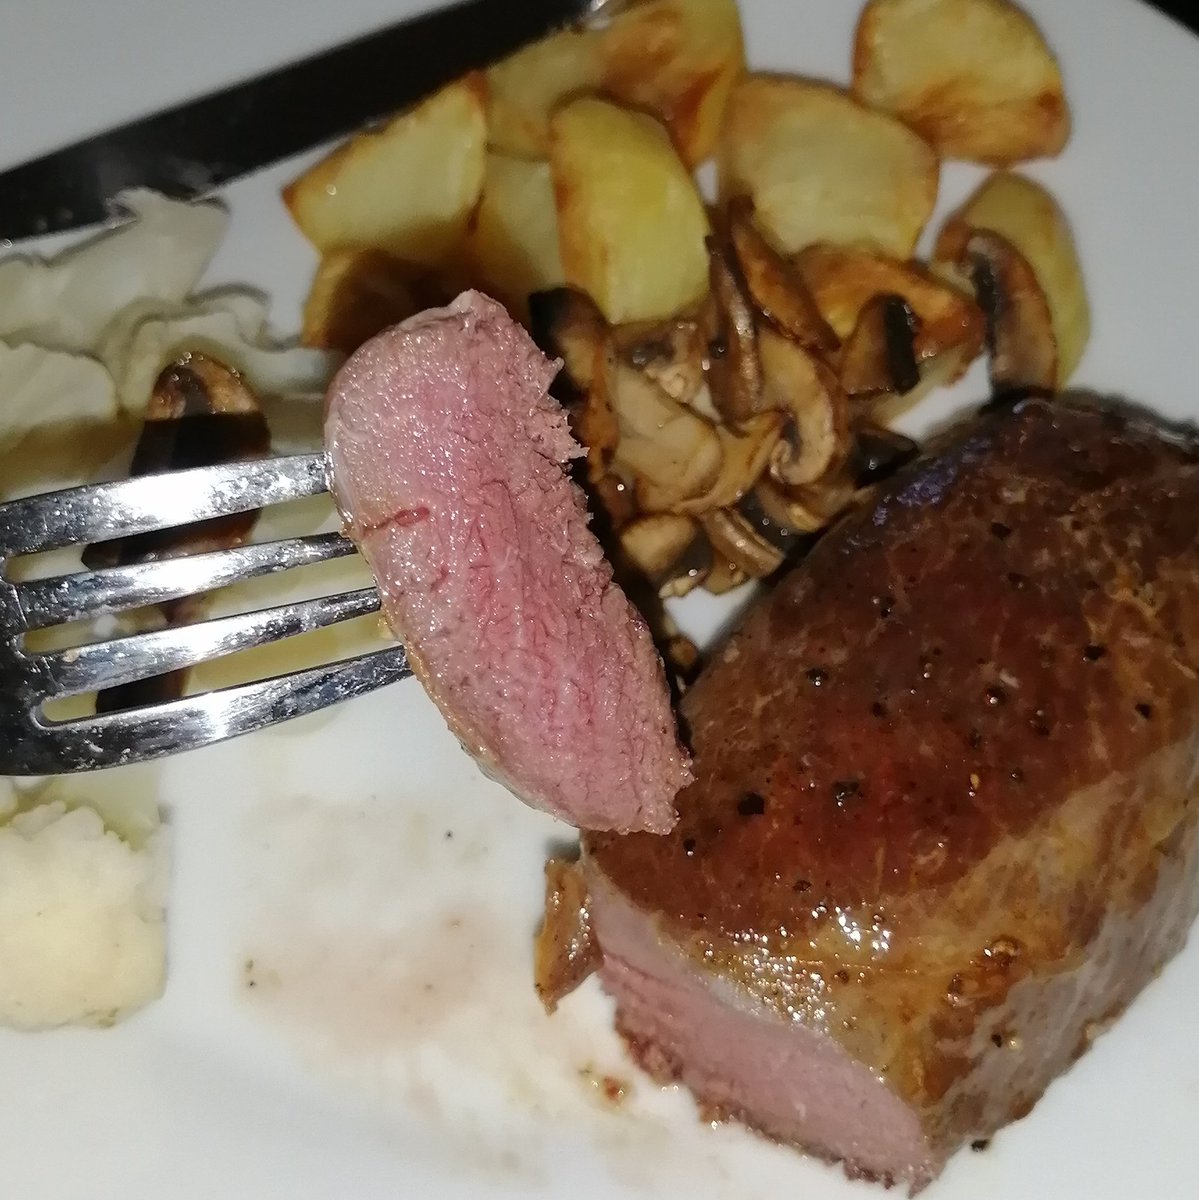 Not going to lie, pretty pleased with that venison steak. Did the Gordon Ramsay thing with the plate and the oil and the salt and pepper, then fried 4 mins on one side and 2 on the other. https://t.co/1usYDJ0kAh